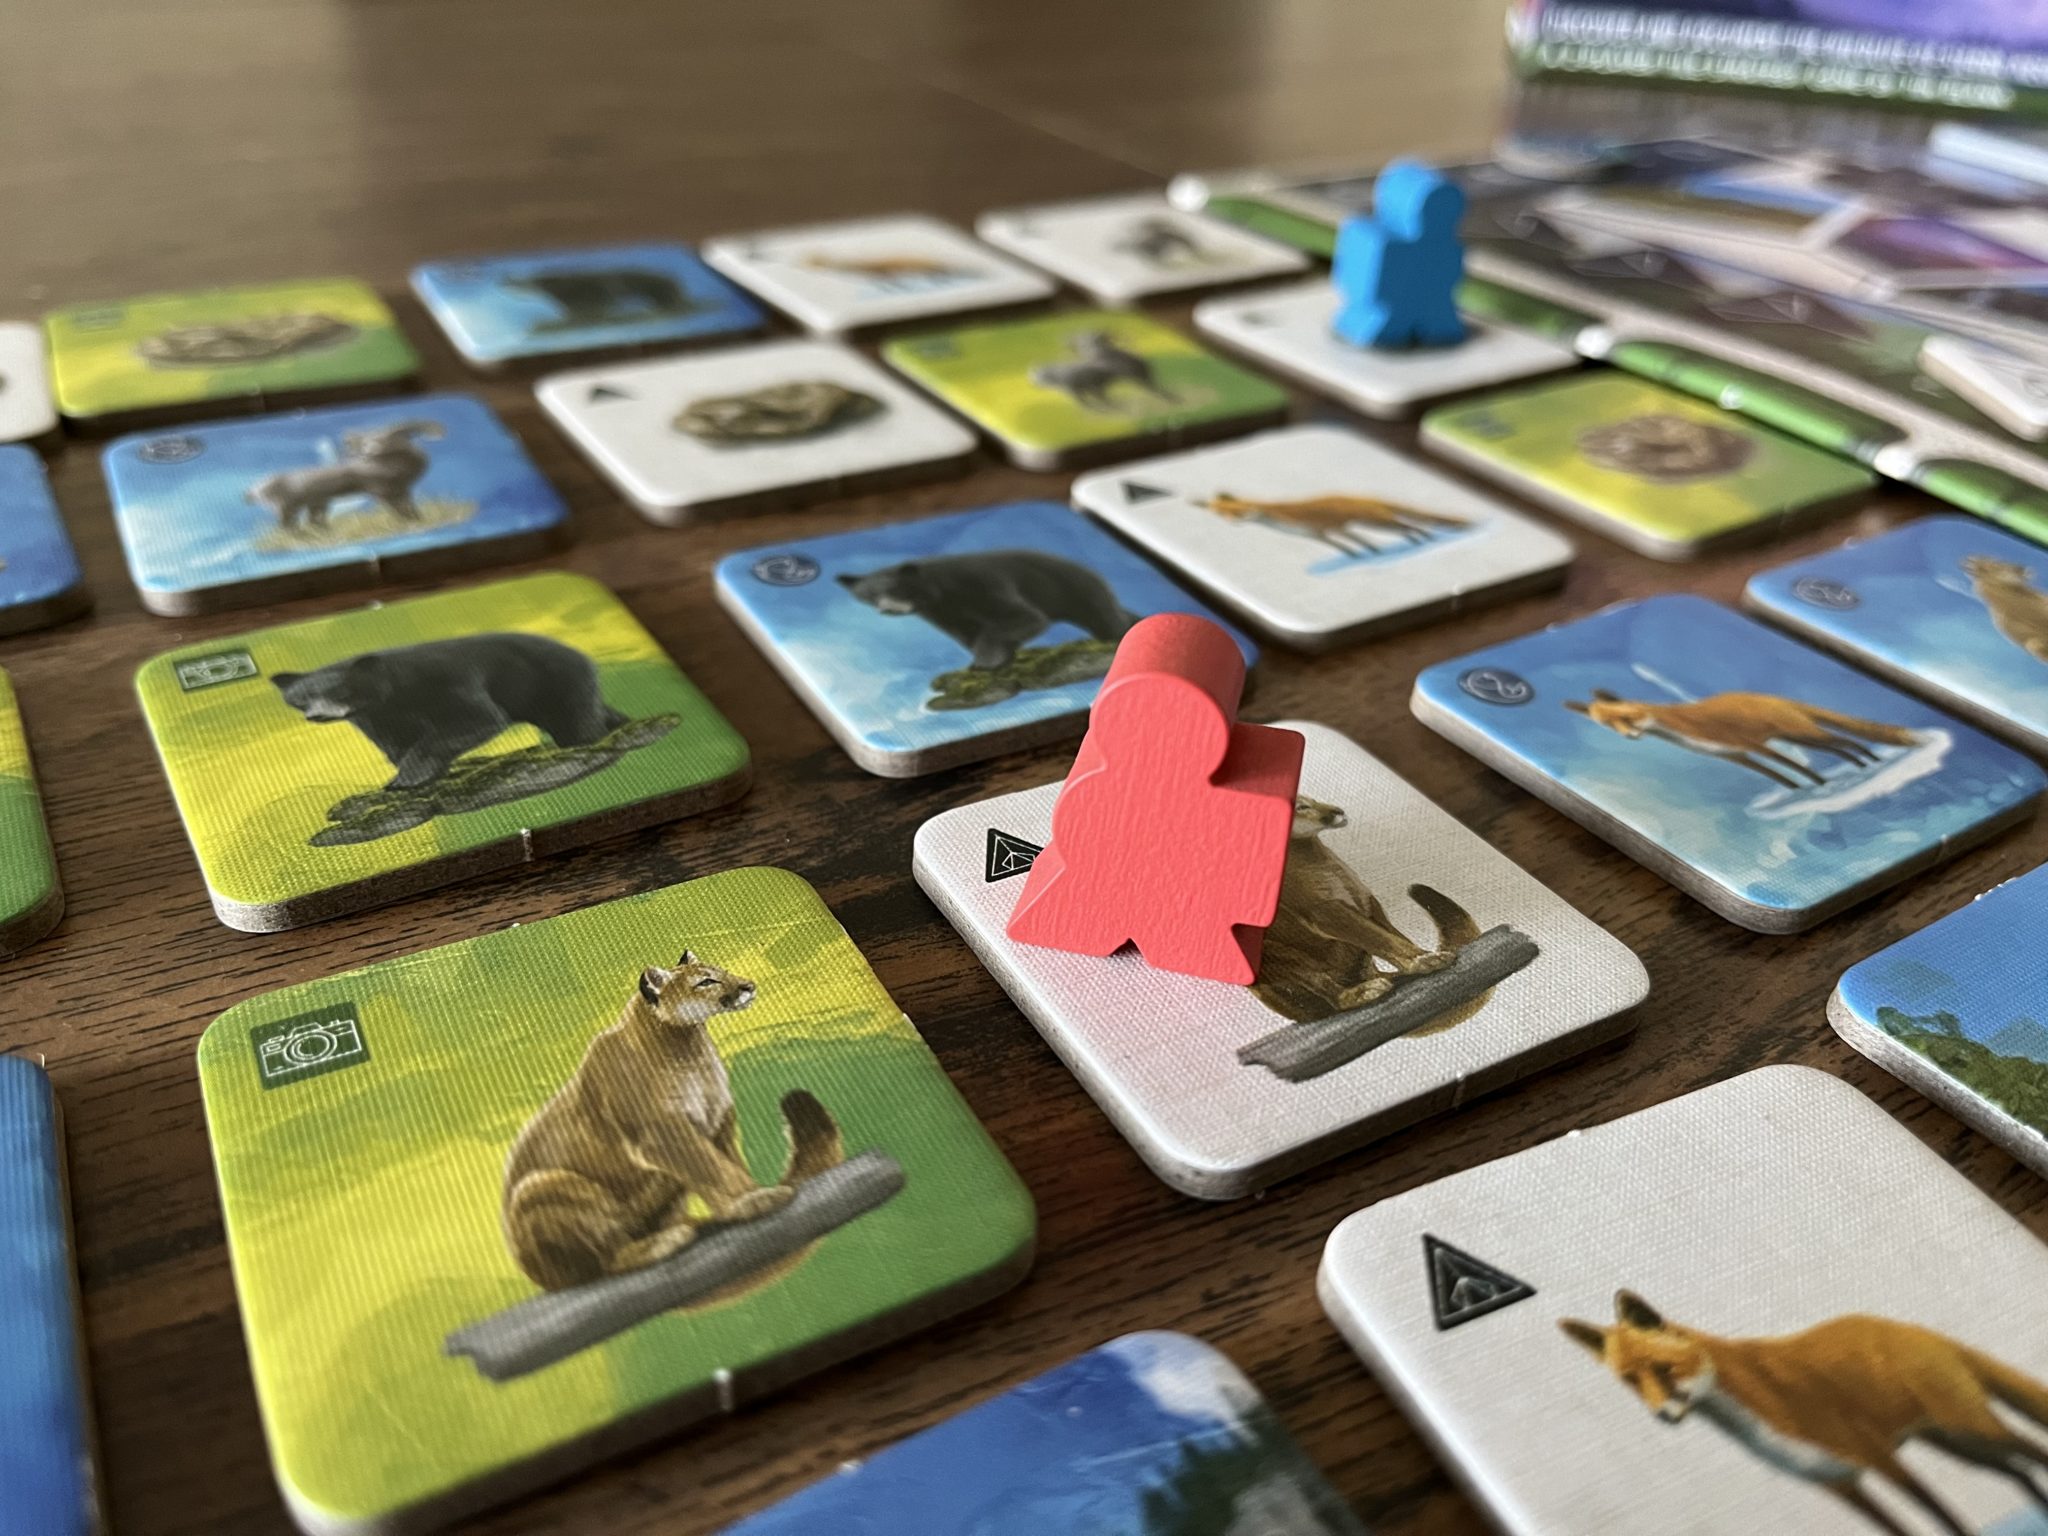 Yosemite Board Game tiles and maples